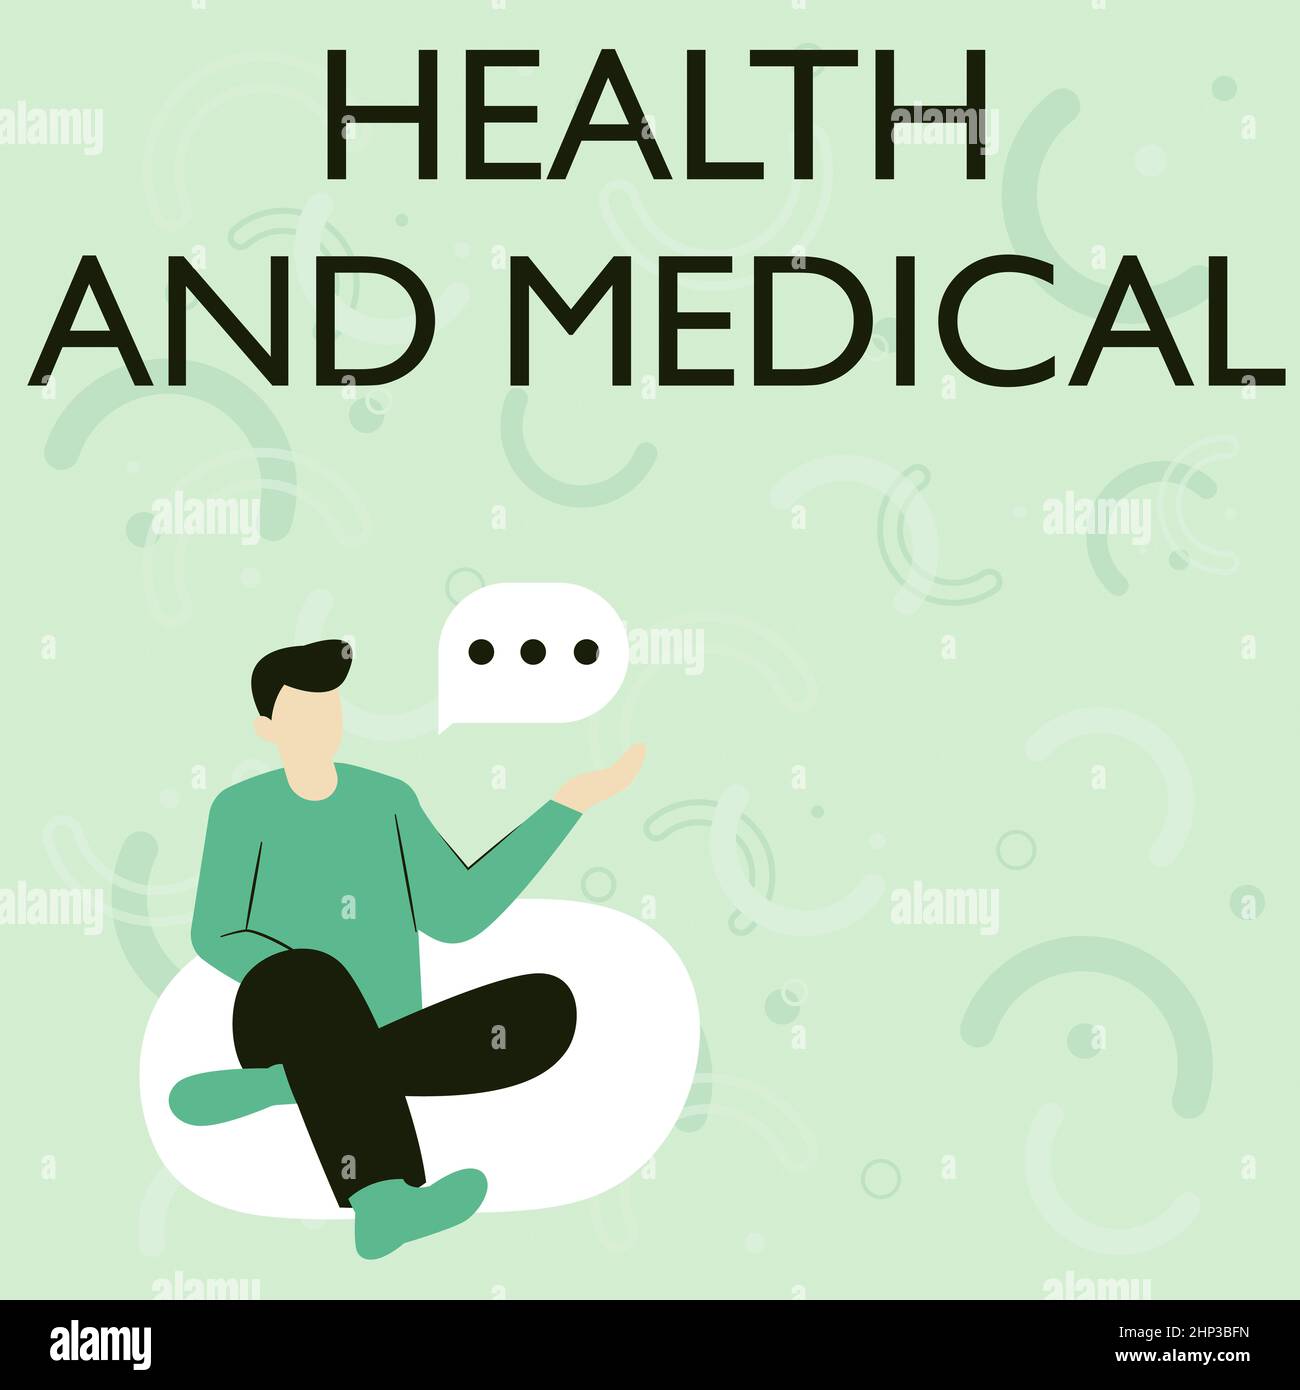 Text showing inspiration Health And Medical, Business idea study and investigation of physical and mental wellbeing Illustration Of Businessman Sittin Stock Photo